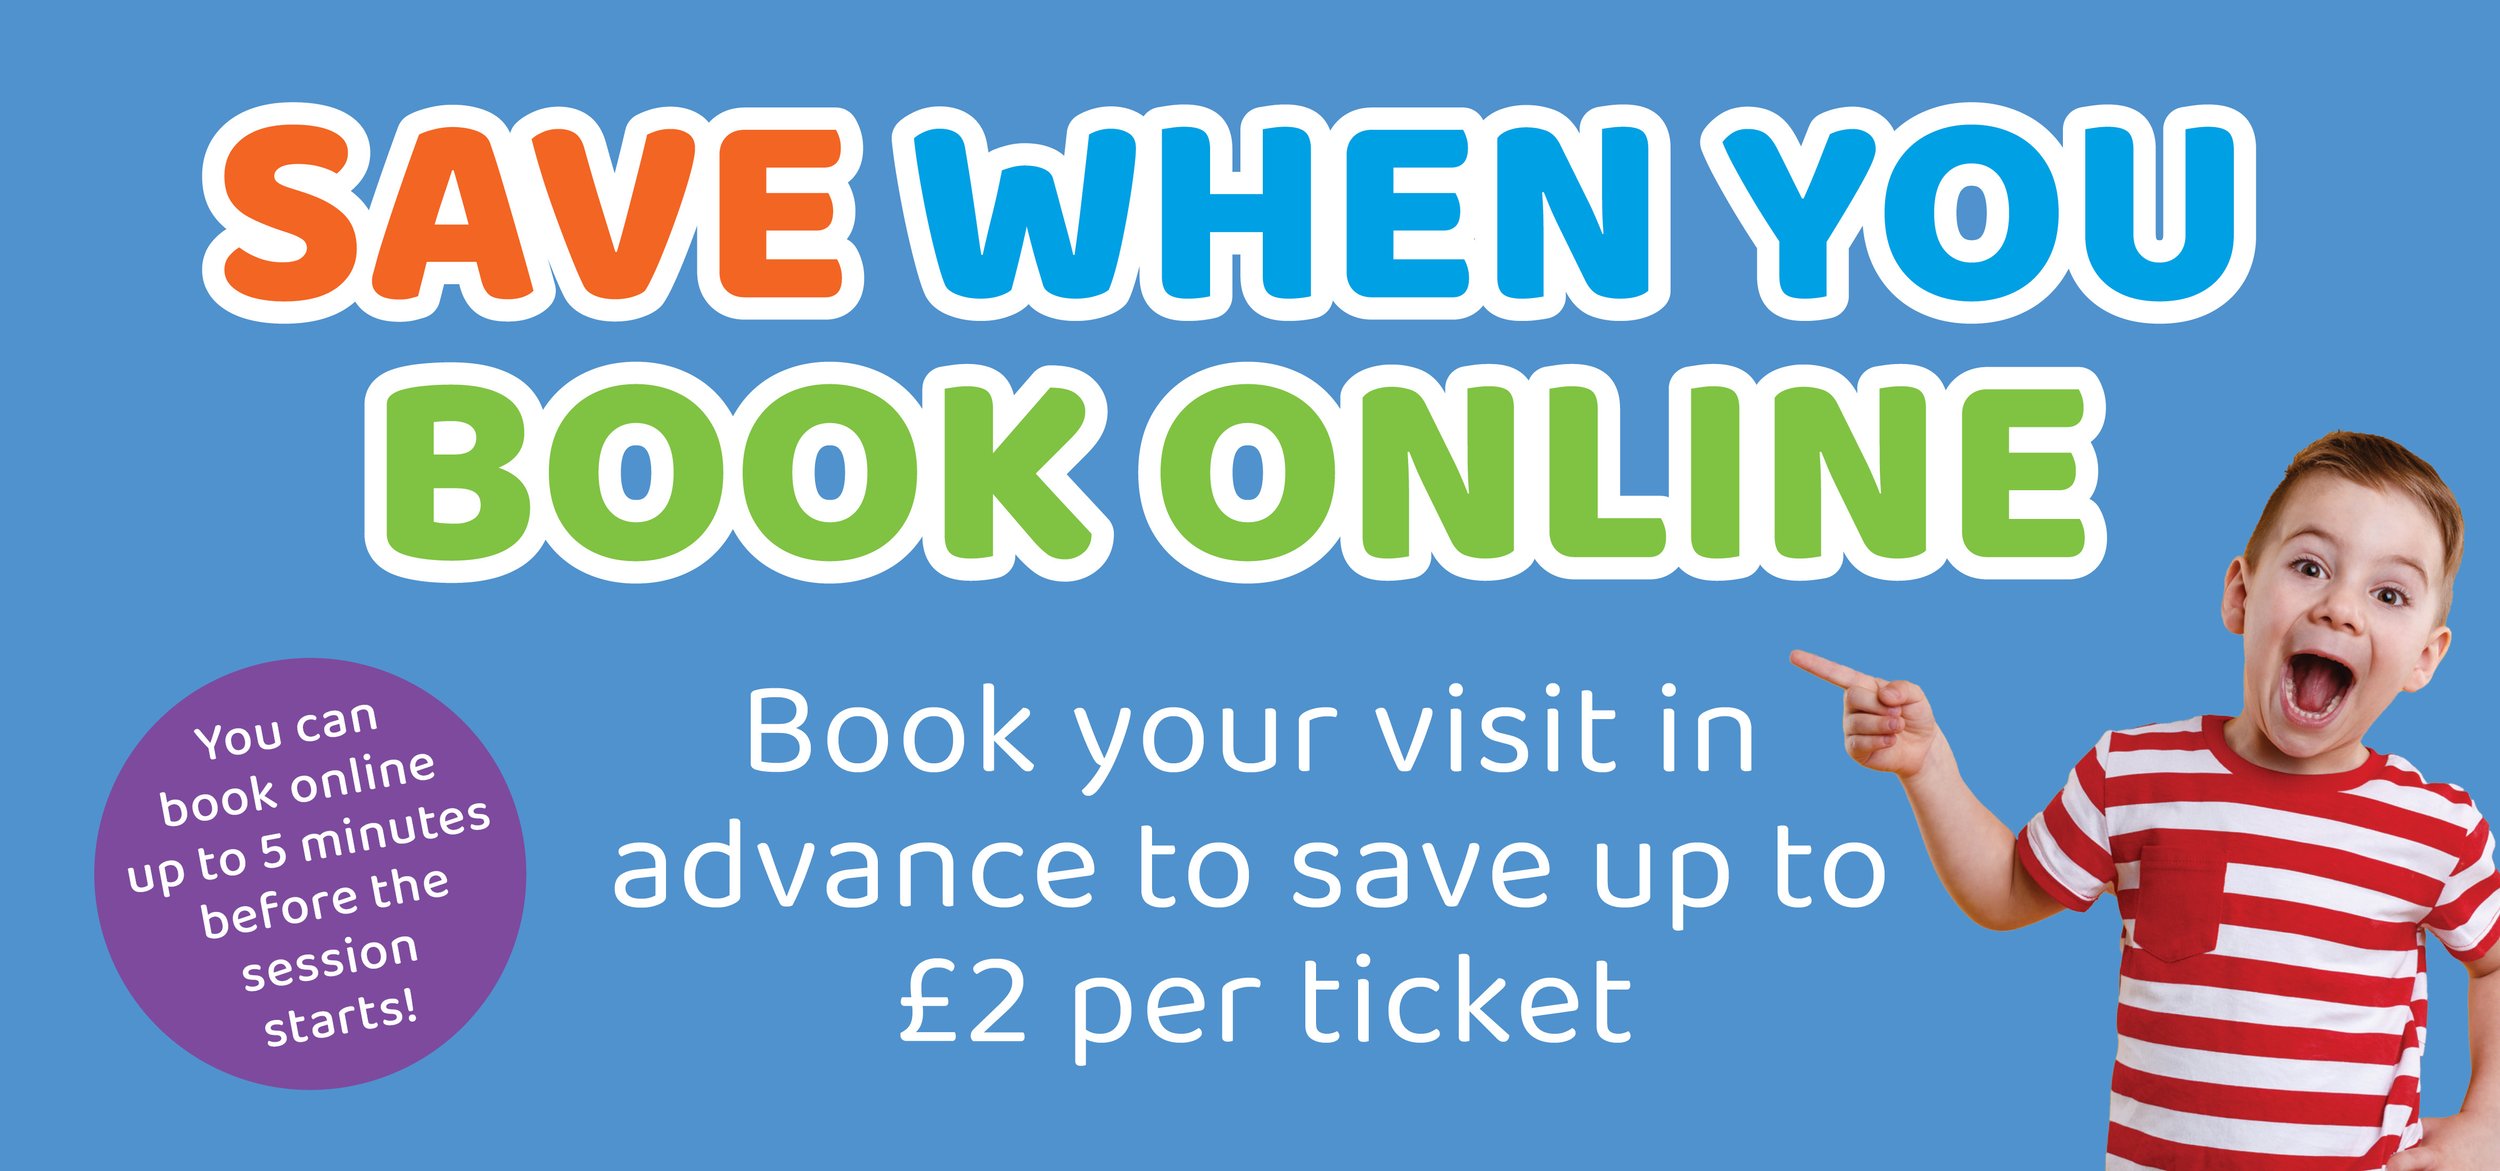 Save When You Book Online - Website Banners.jpg